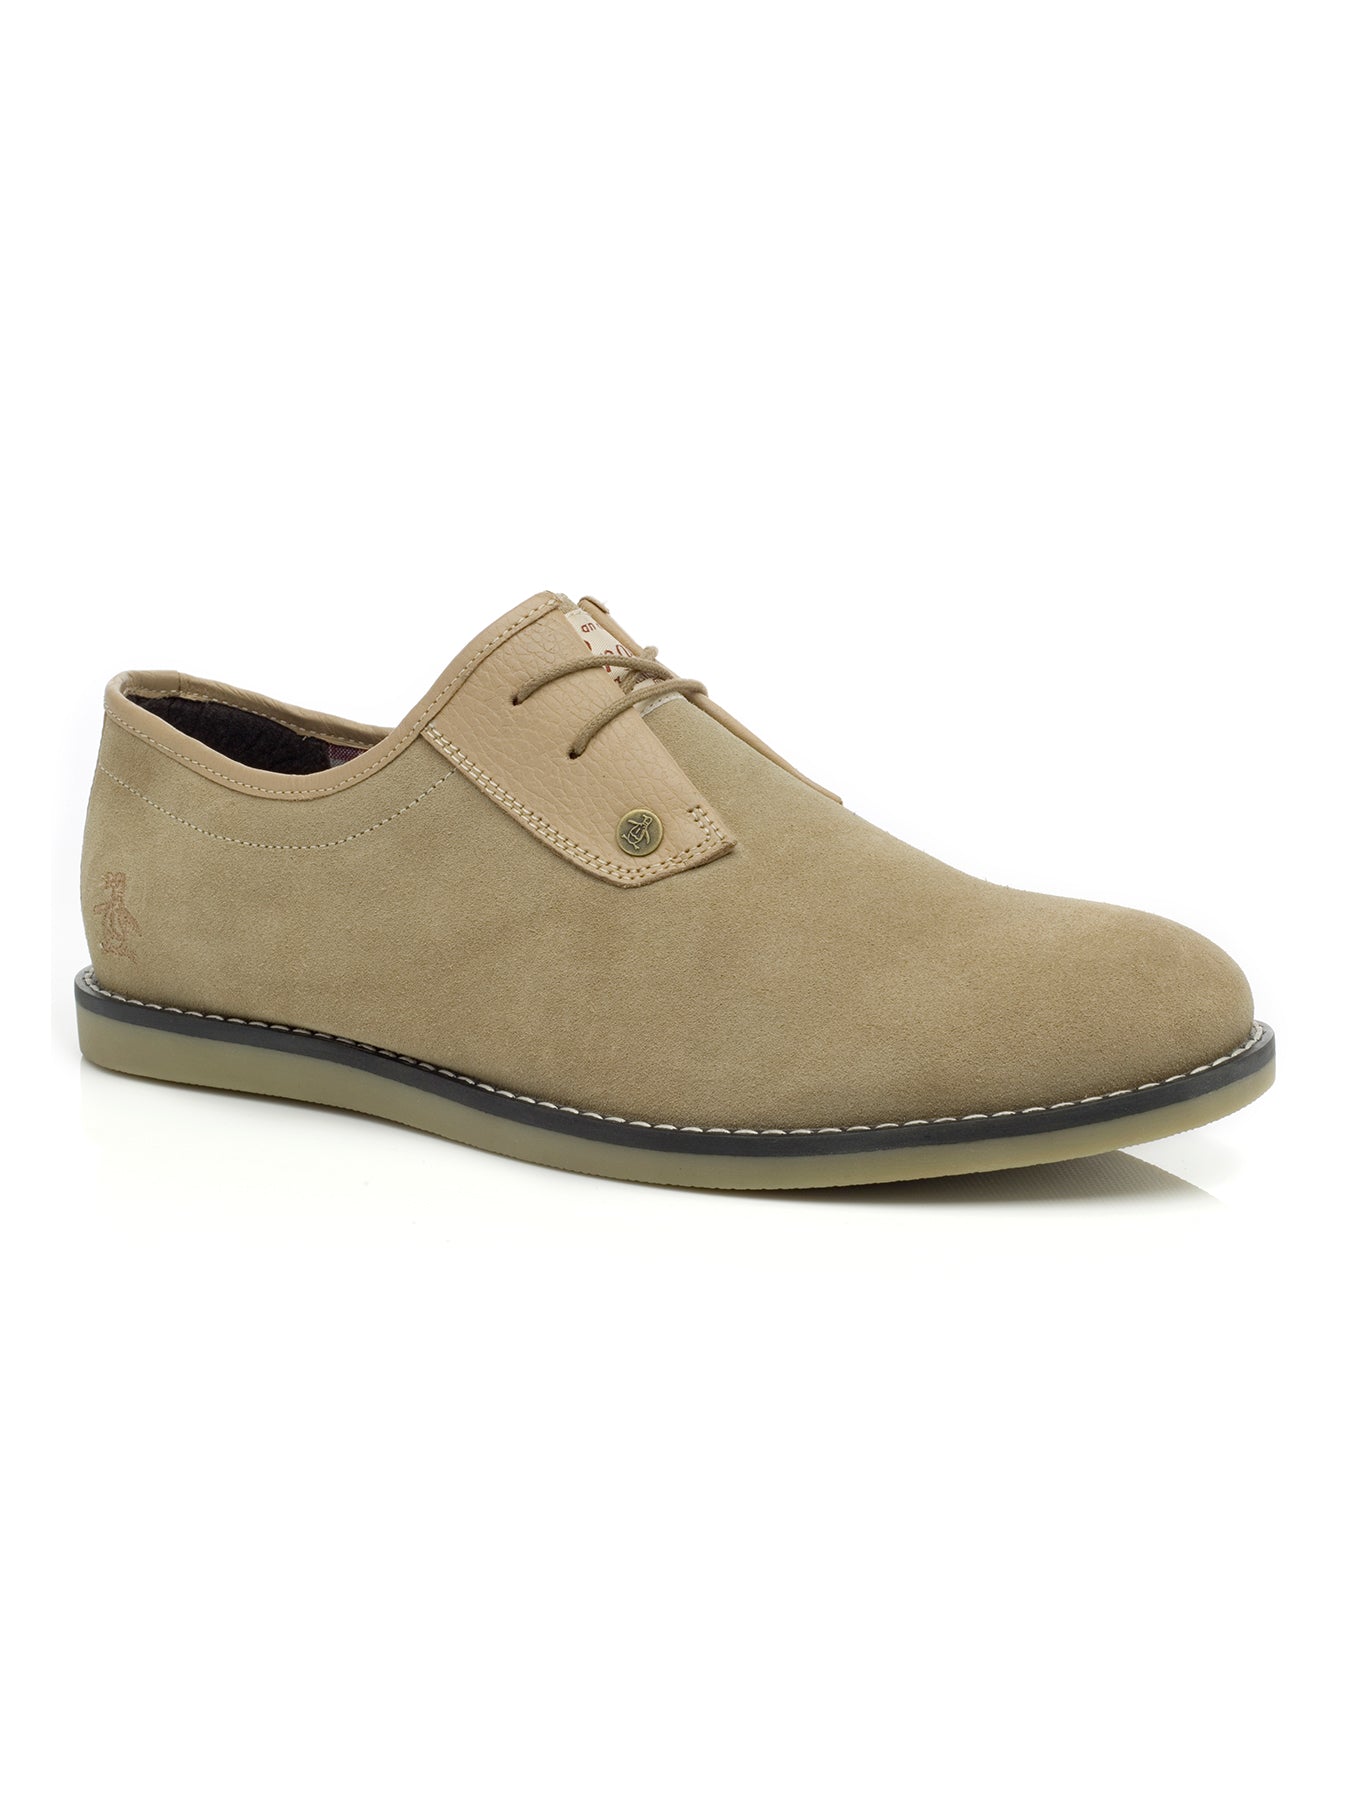 View Lead Suede Shoes In Sand information